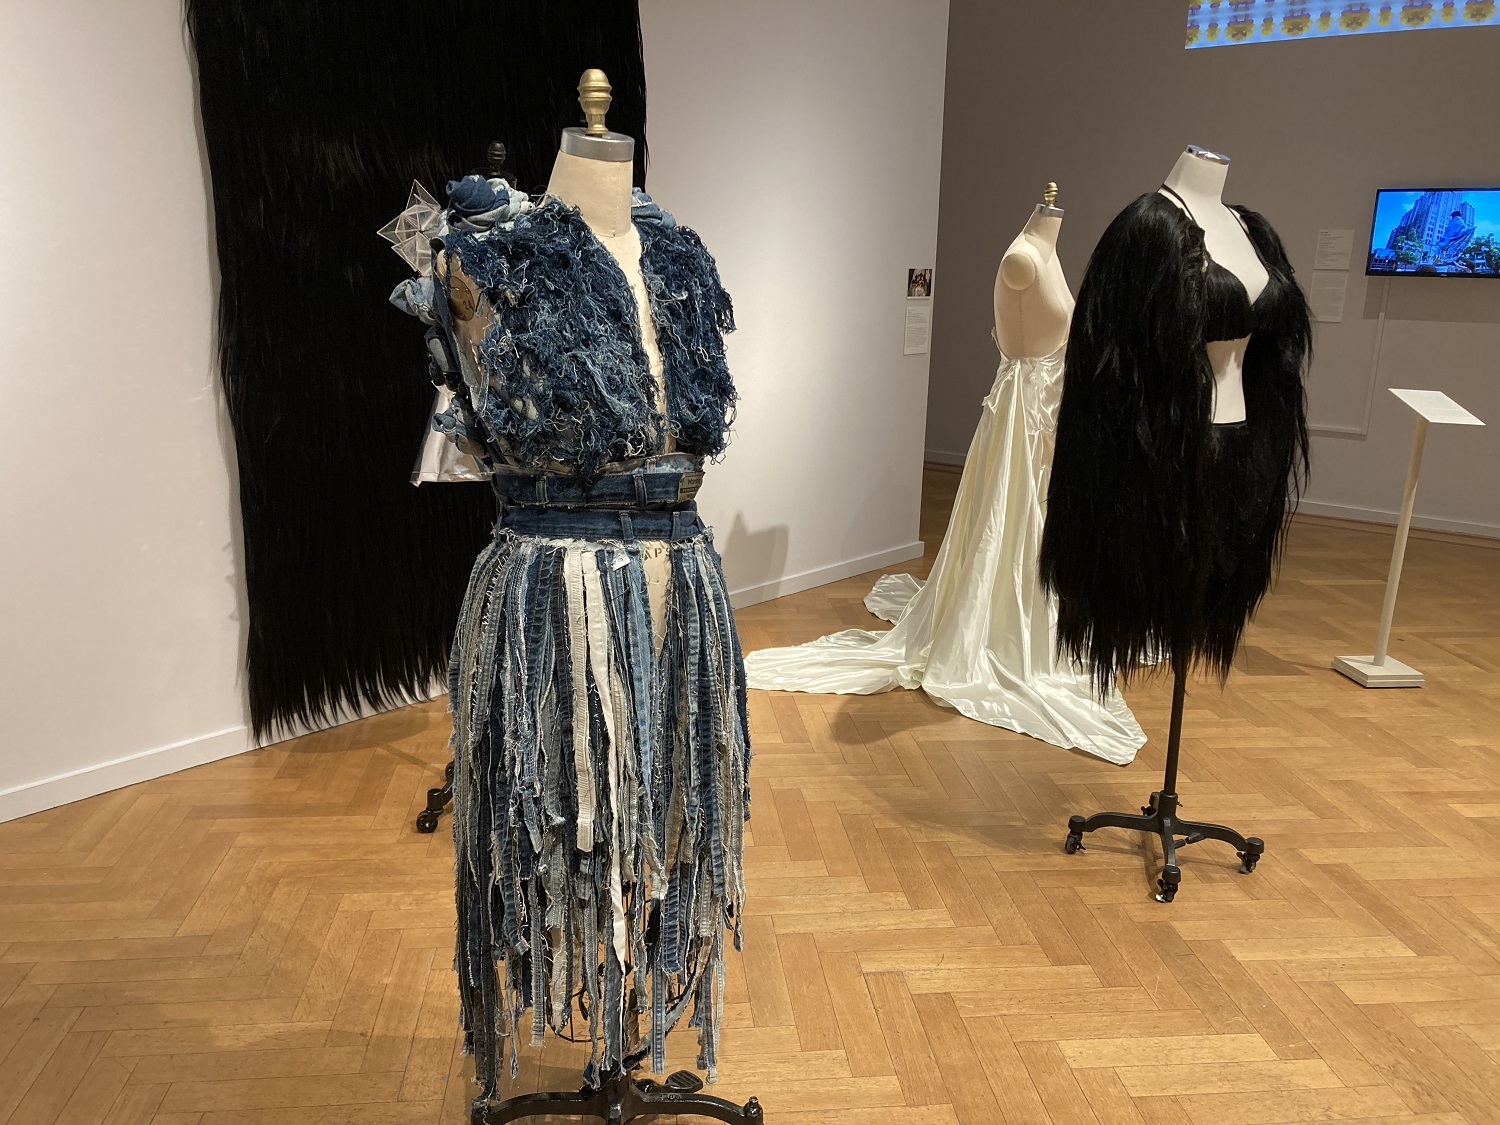 Newport Art Museum weaves textiles and apparel in two outstanding exhibitions